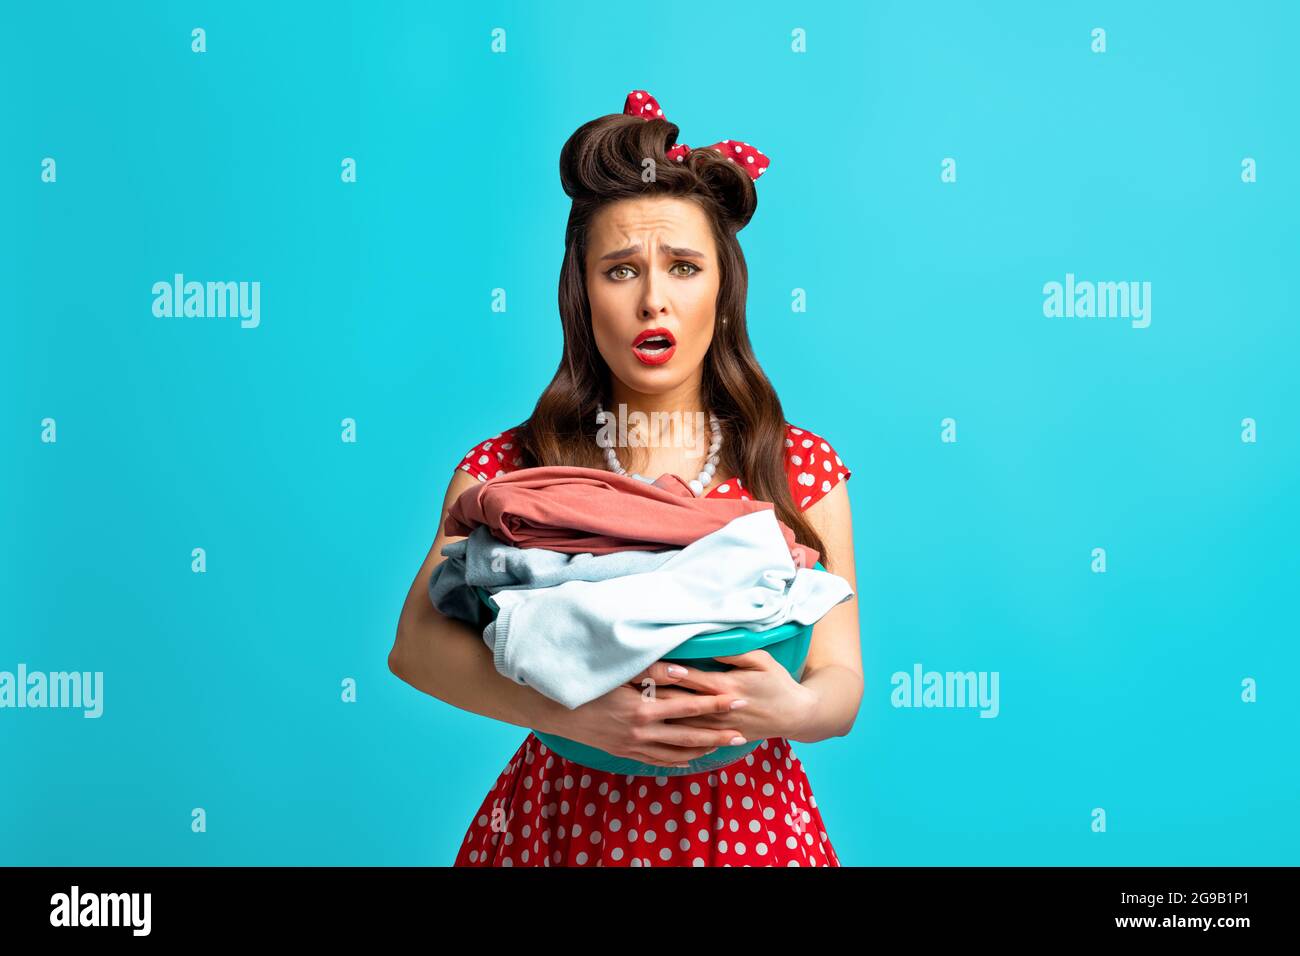 Unhappy tired young pinup woman in retro dress holding basin with laundry for washing or ironing on blue background Stock Photo